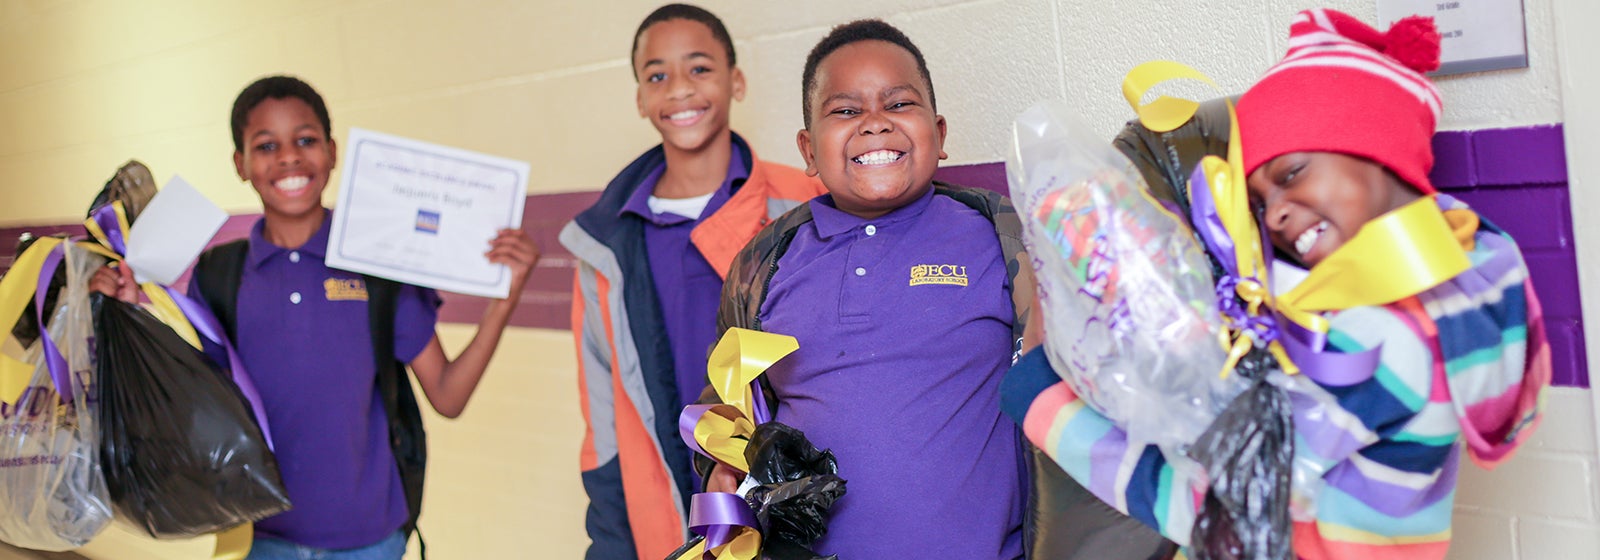 ECU Lab School scholars show off their surprise holiday gifts inside the Lab School at South Greenville Elementary School.